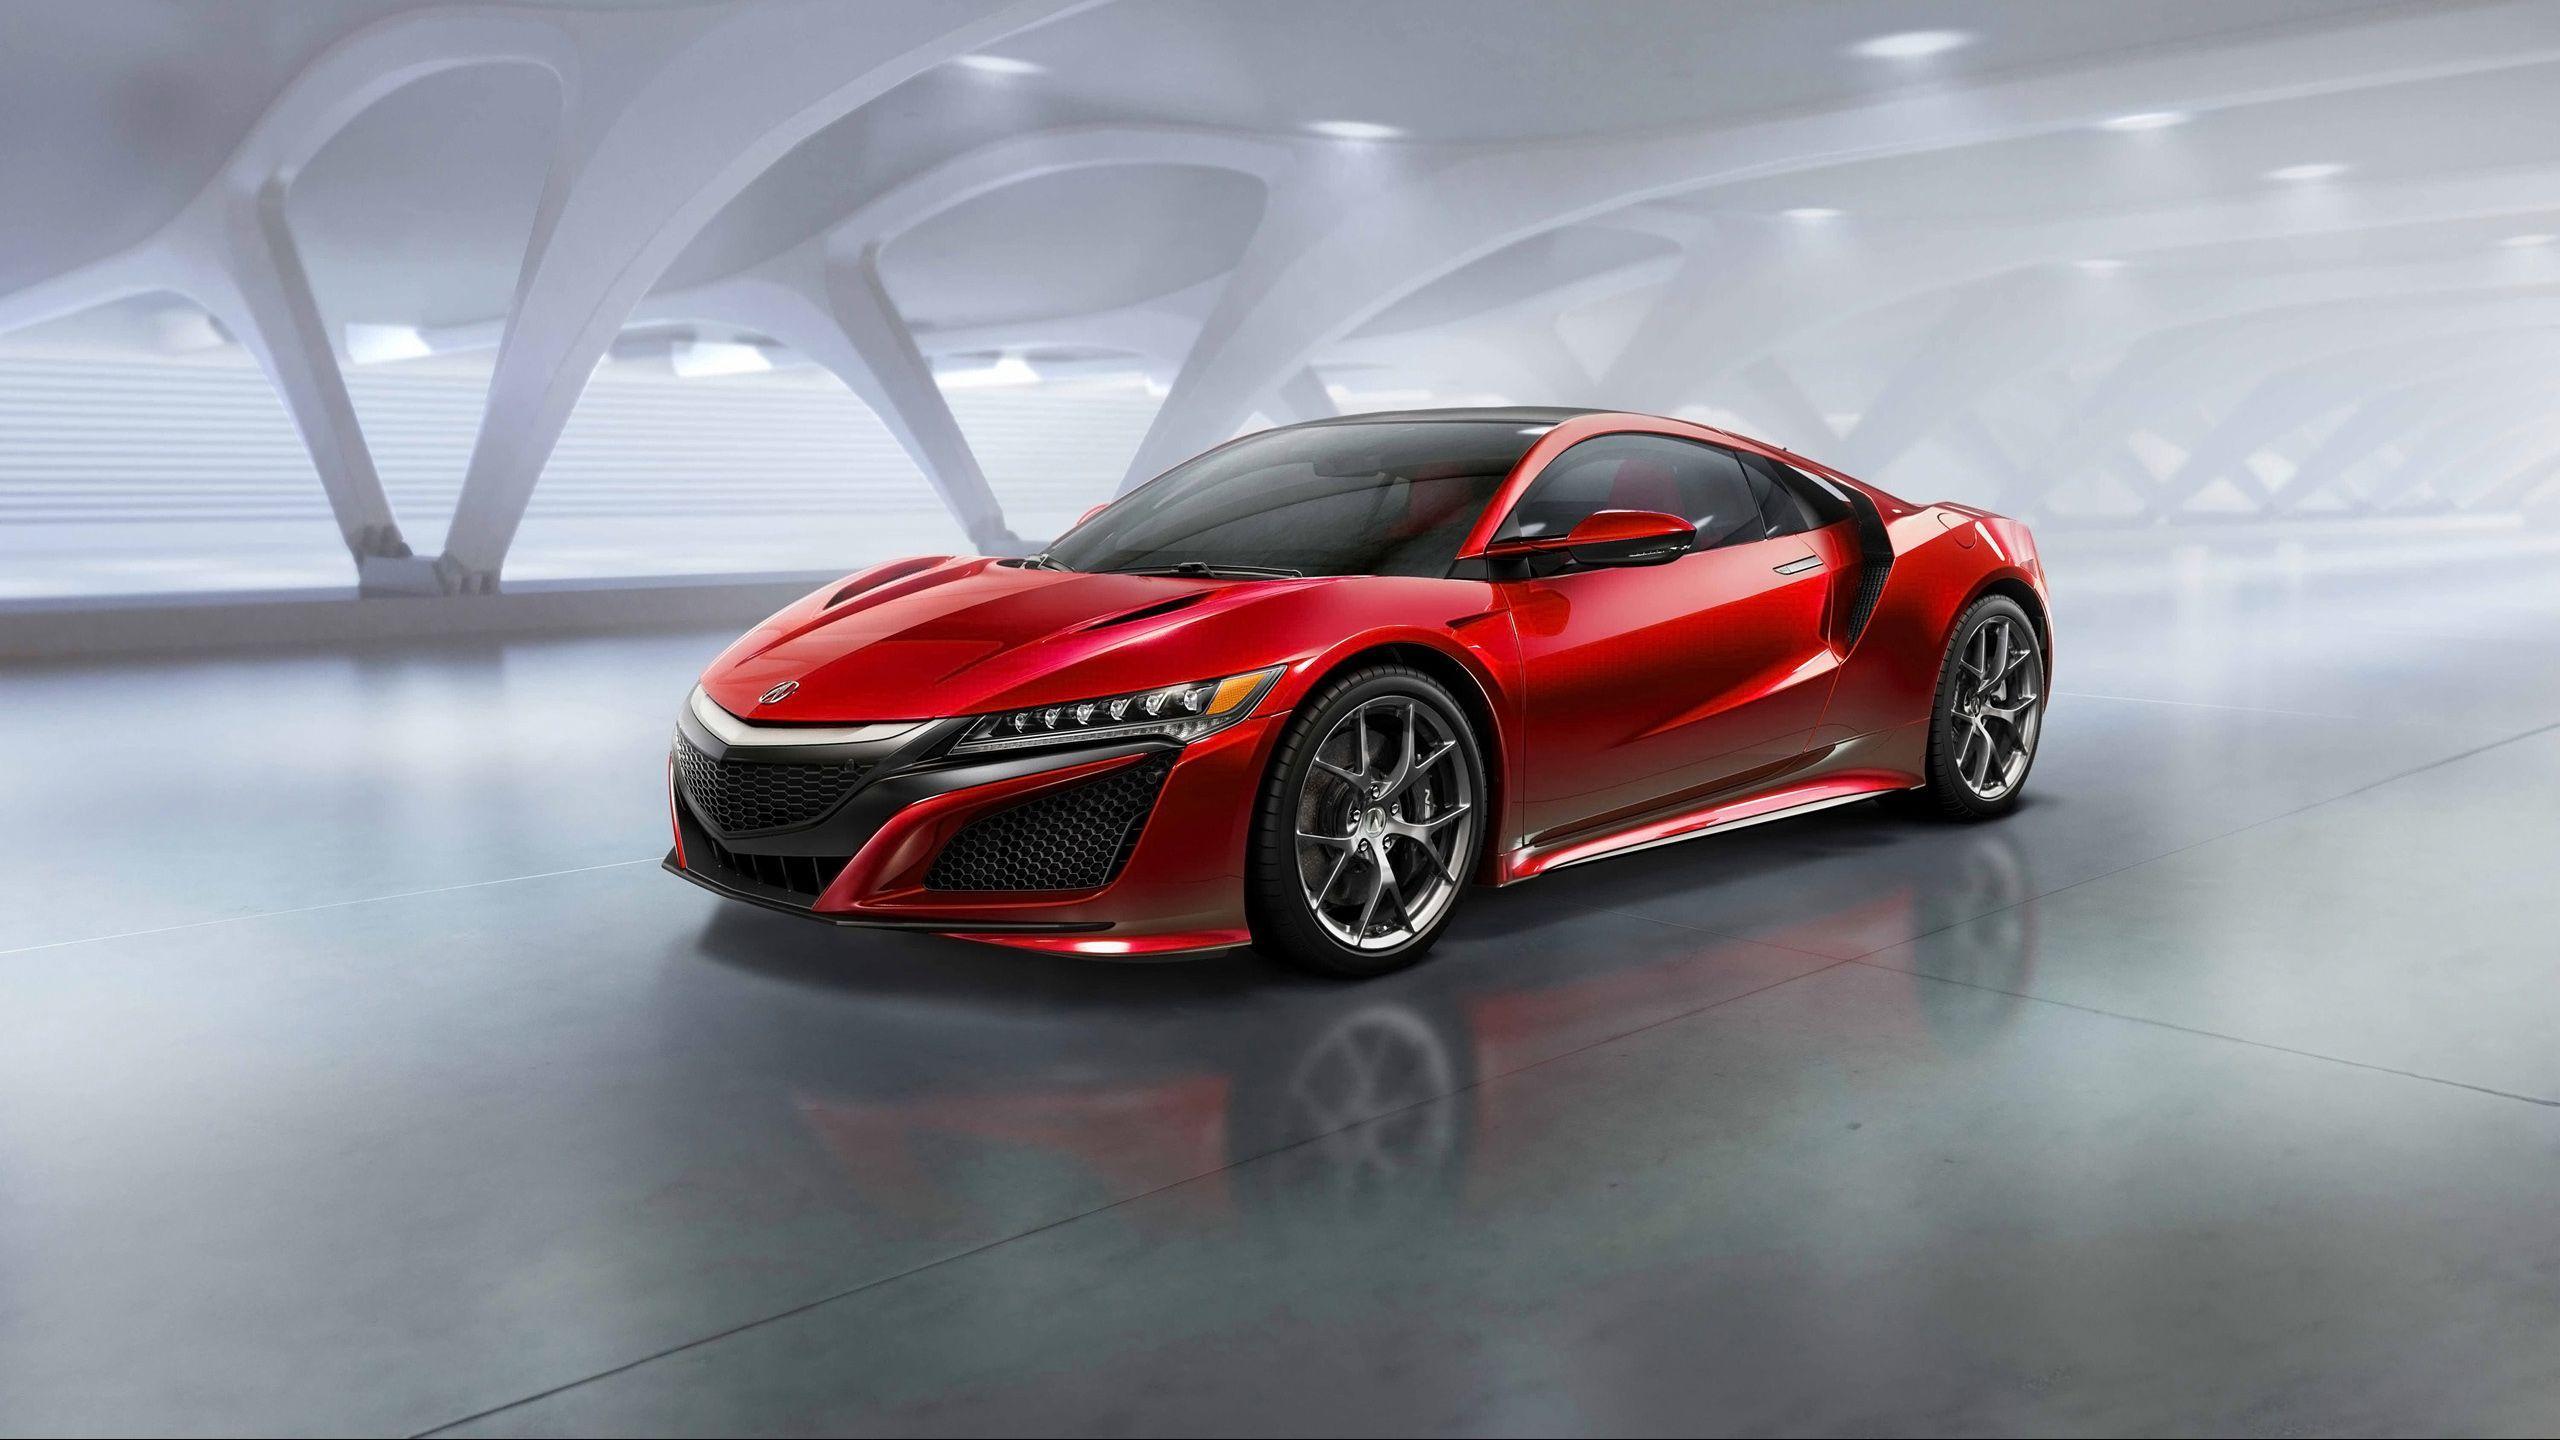 Acura NSX 2K wallpapers free download